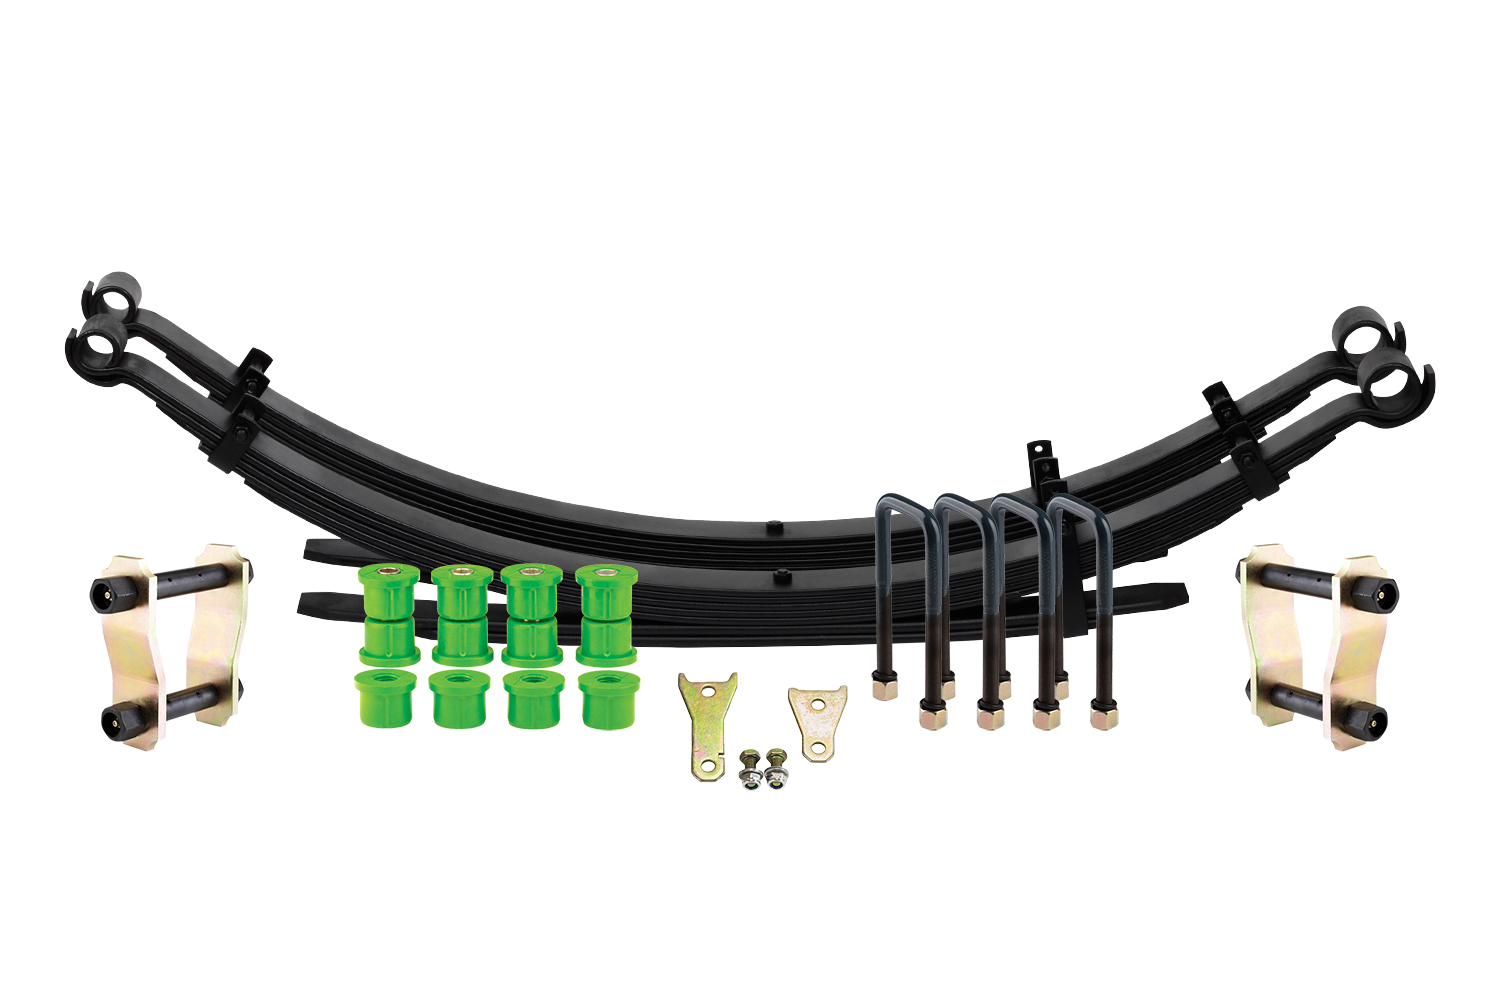 Rear Leaf Springs Kit Suited for Toyota Tundra 2007-2021 - Heavy Load (440-880LBS) Questions & Answers